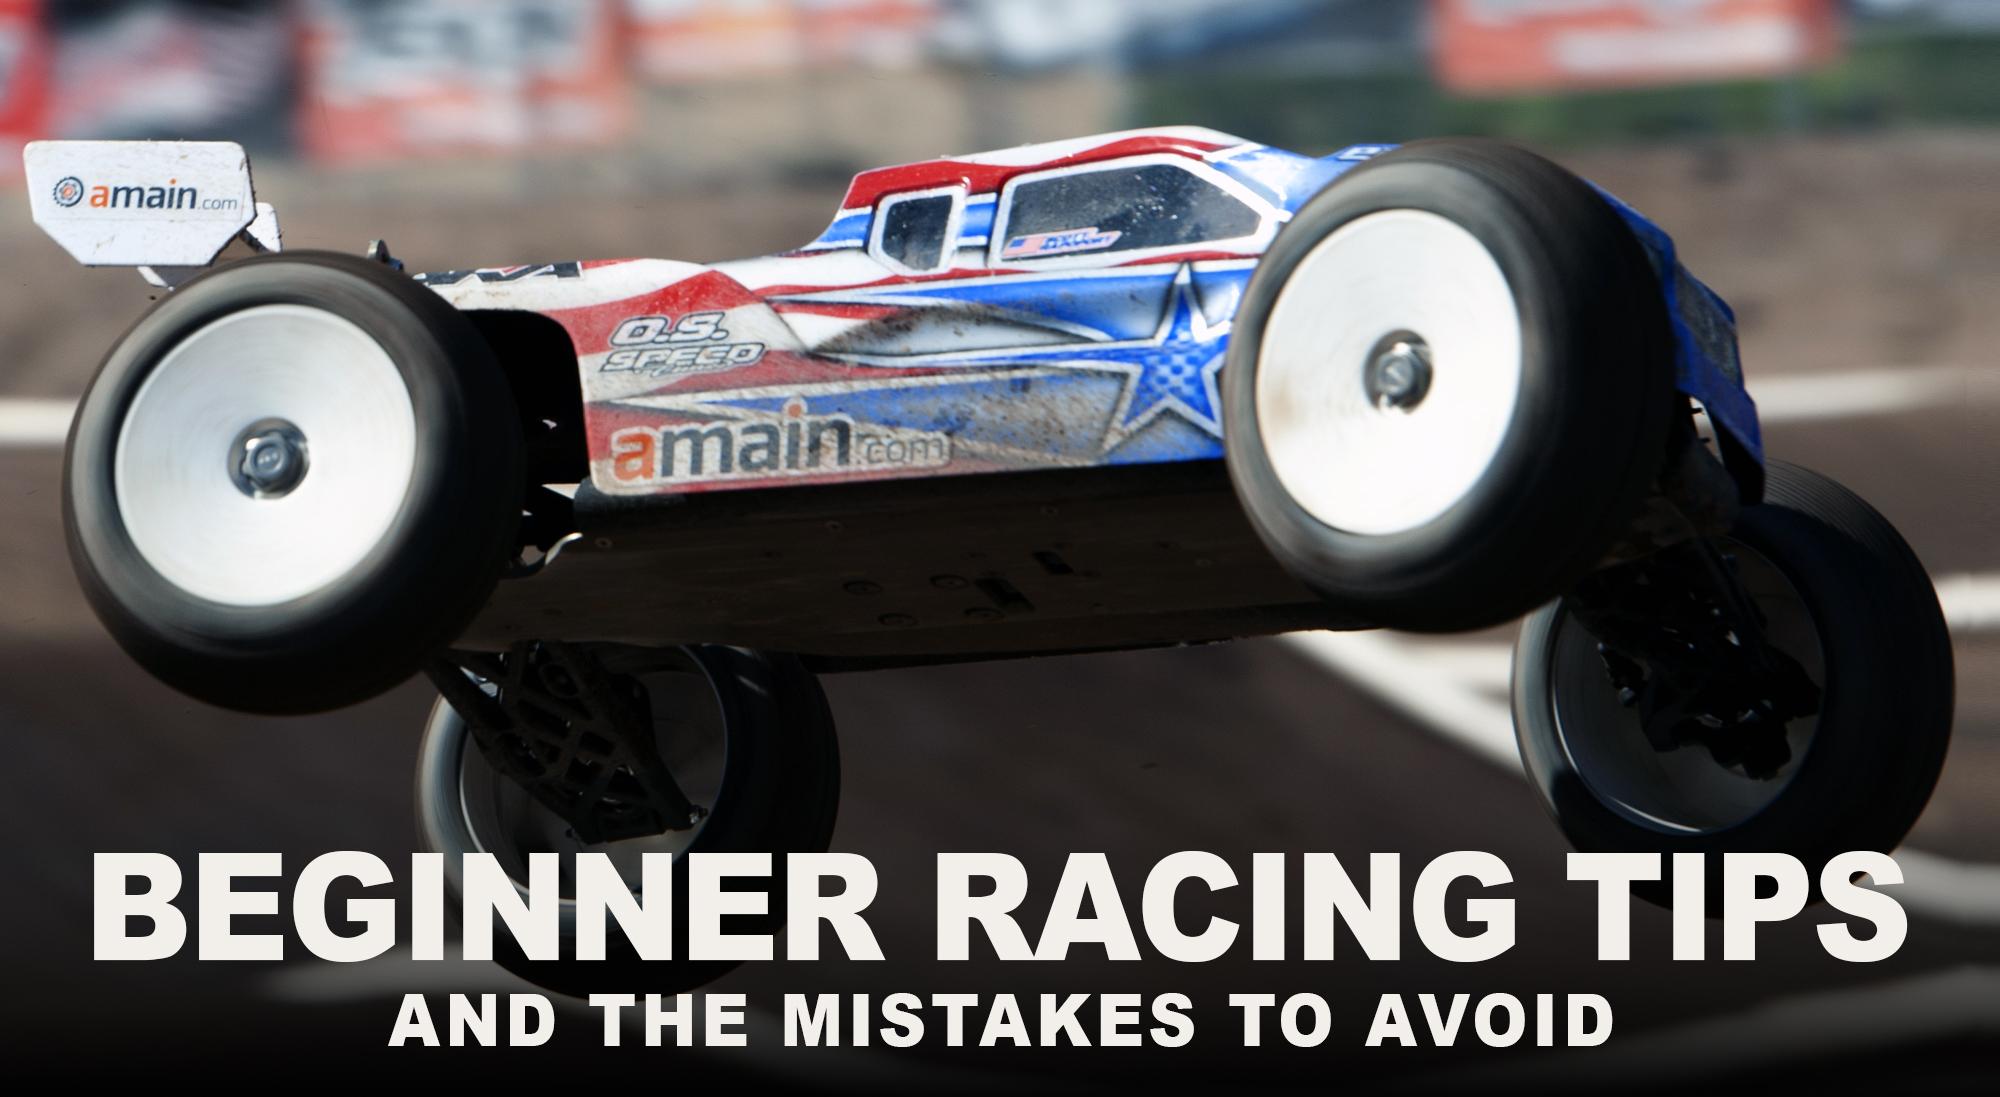 Electric Rc Cars And Trucks: Start Racing: Tips for beginners and popular types of events for electric RC cars and trucks